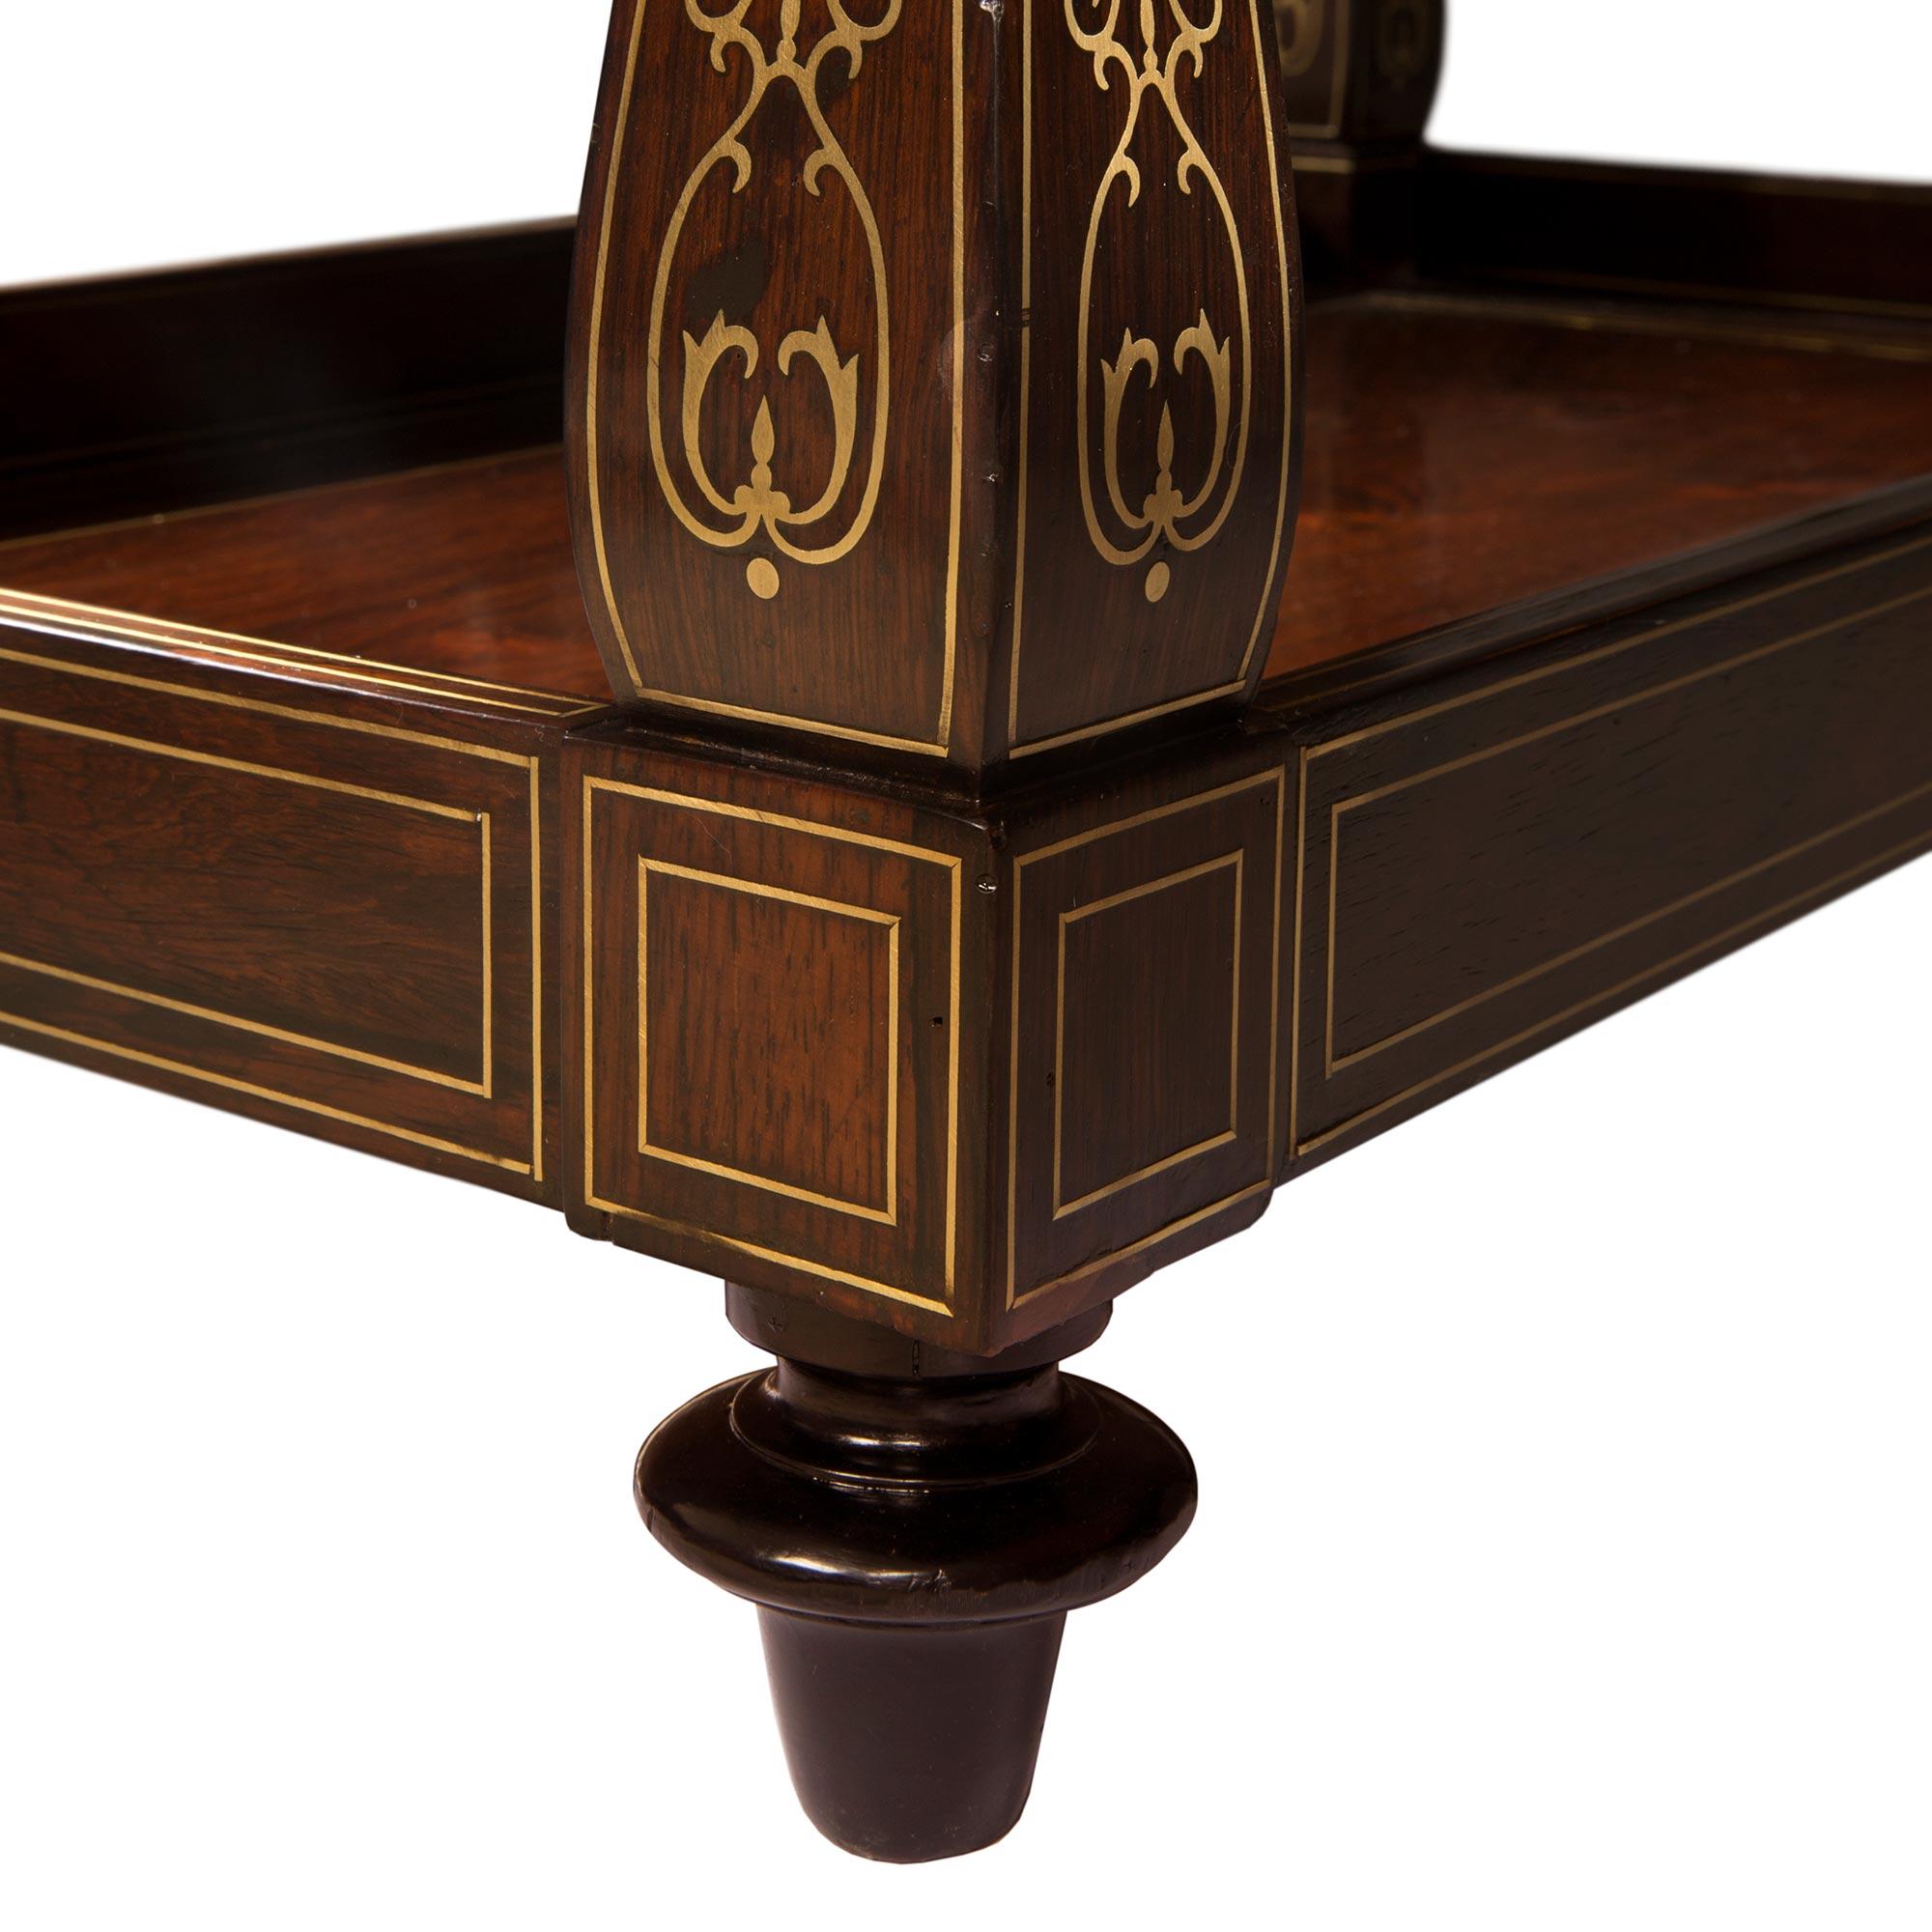 French 19th Century Charles X Period Rosewood and Brass Inlaid Desk For Sale 7